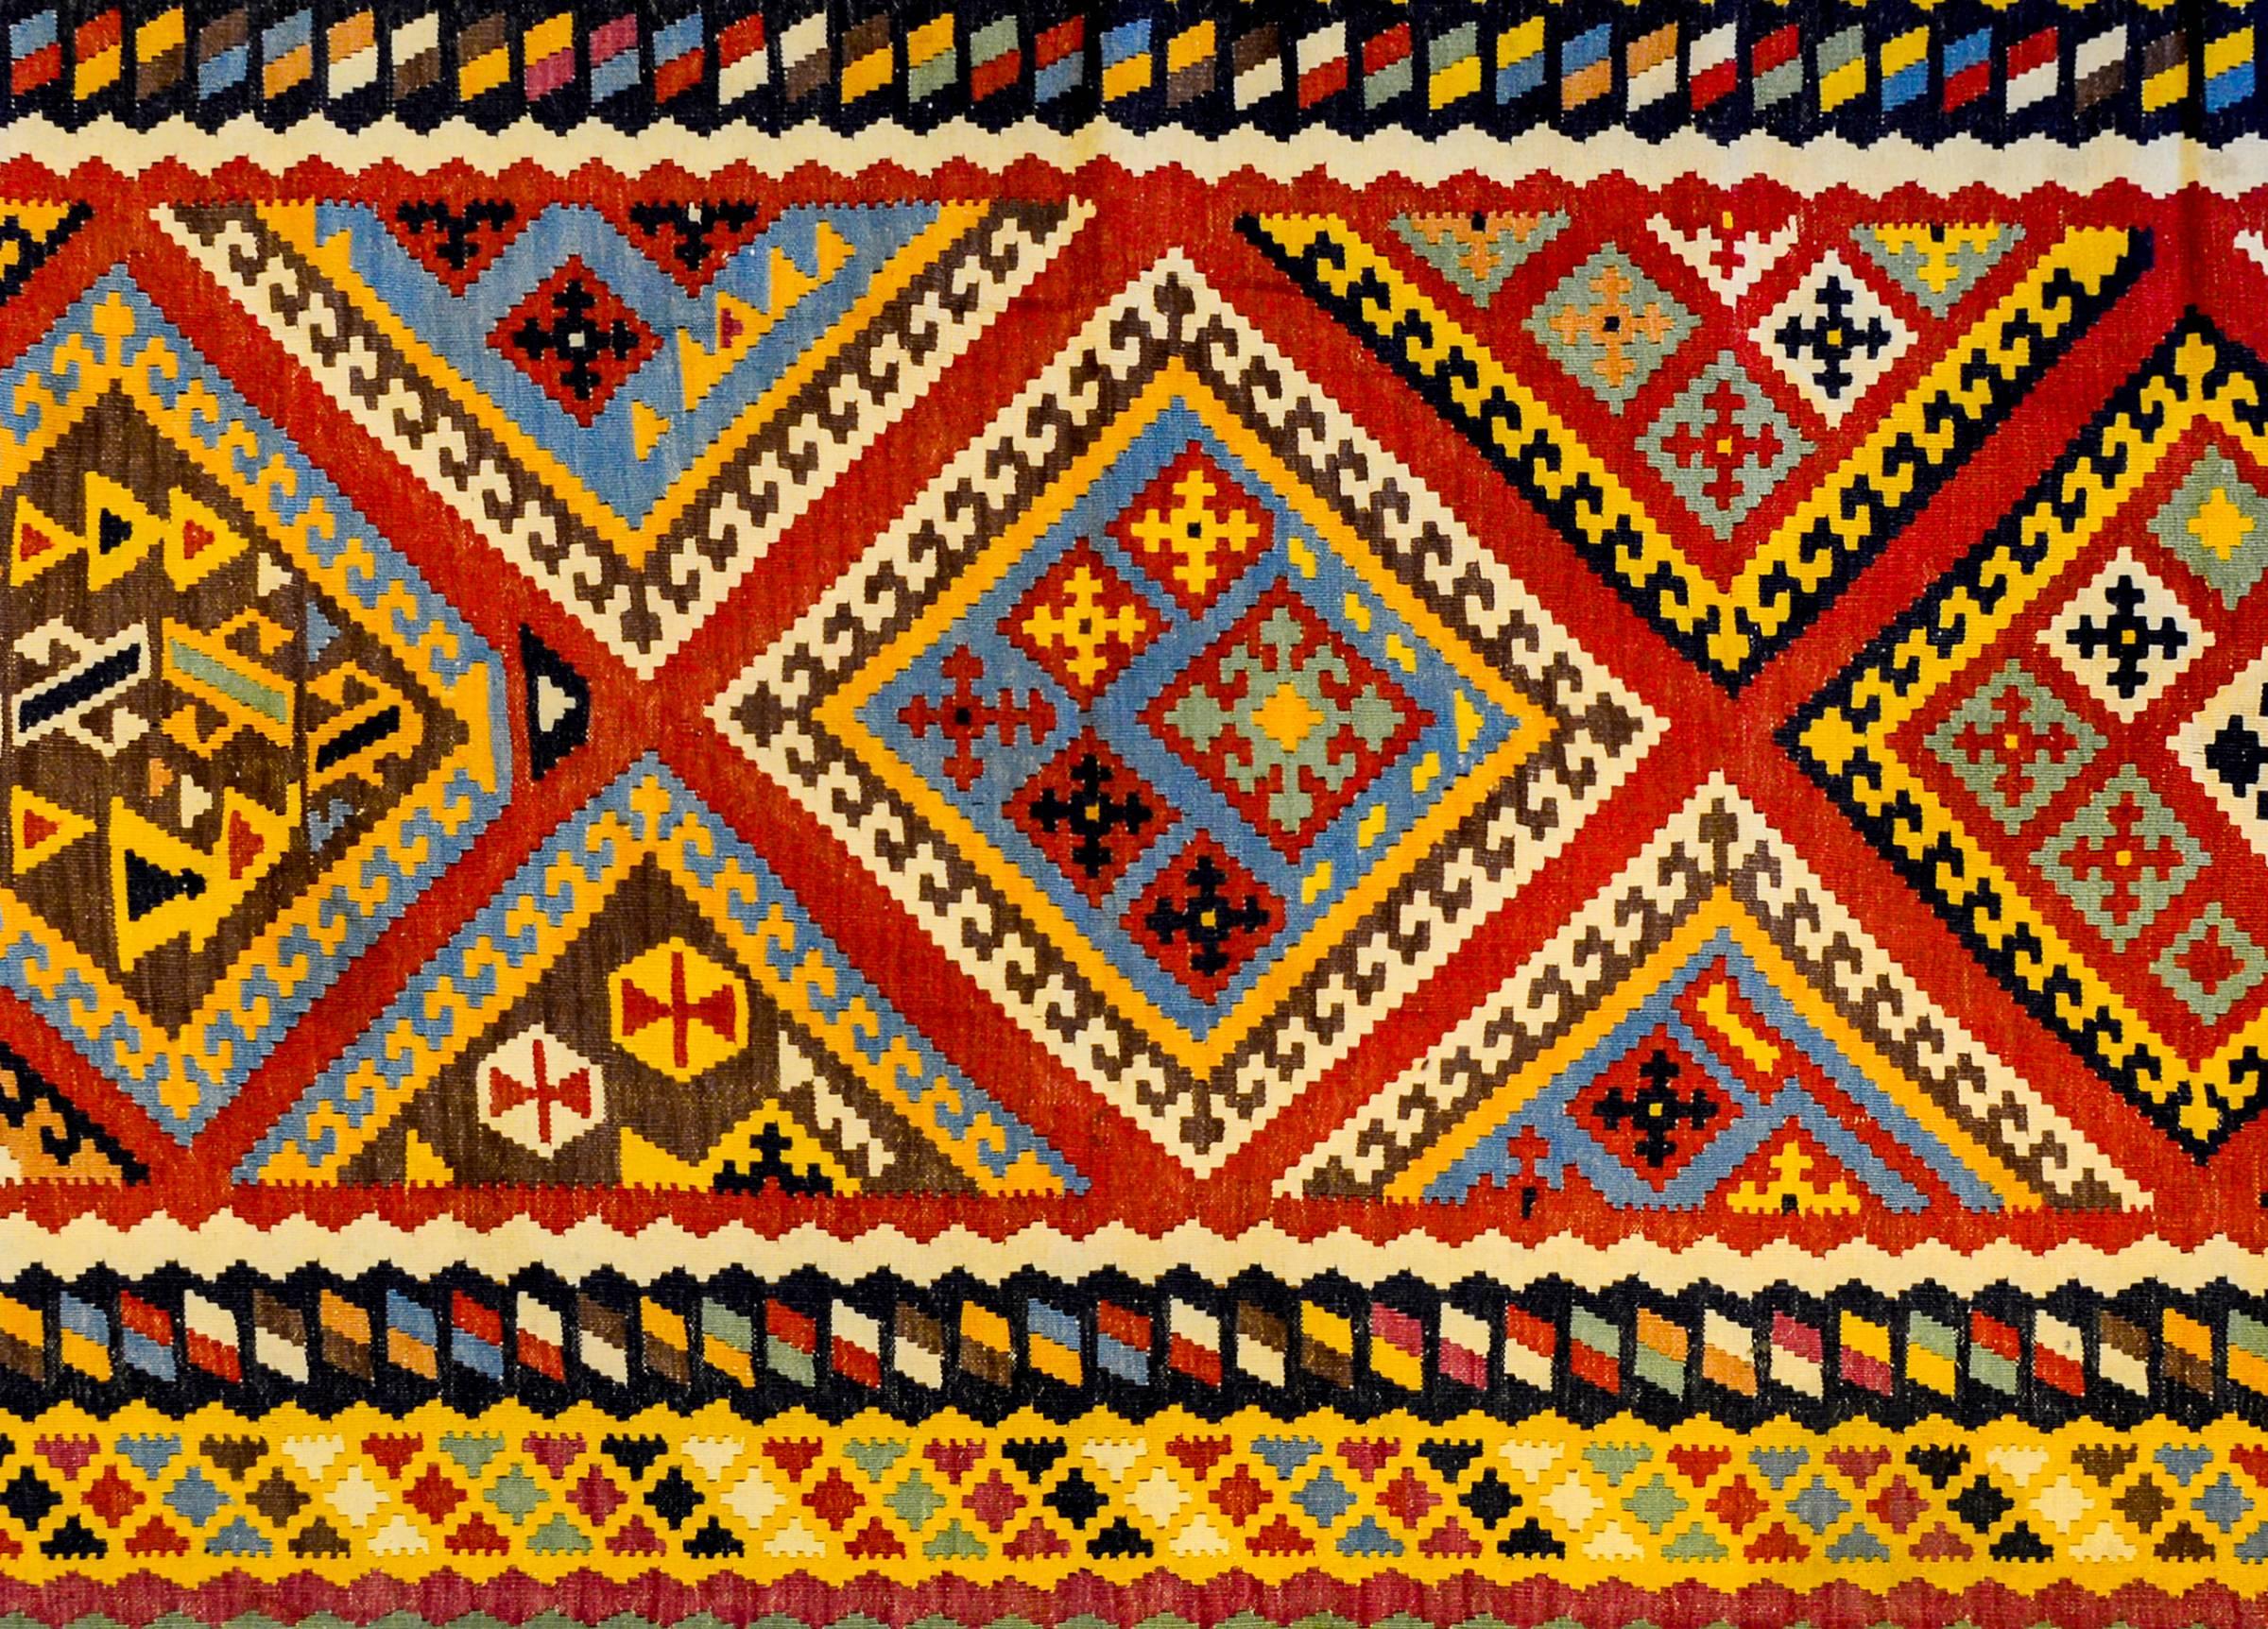 An outstanding mid-20th century Shiraz Kilim runner with an incredibly woven pattern containing stylized geometric flowers on diamond medallions, all woven in crimson, indigo, gold, green, and natural undyed brown and cream wool. The border is